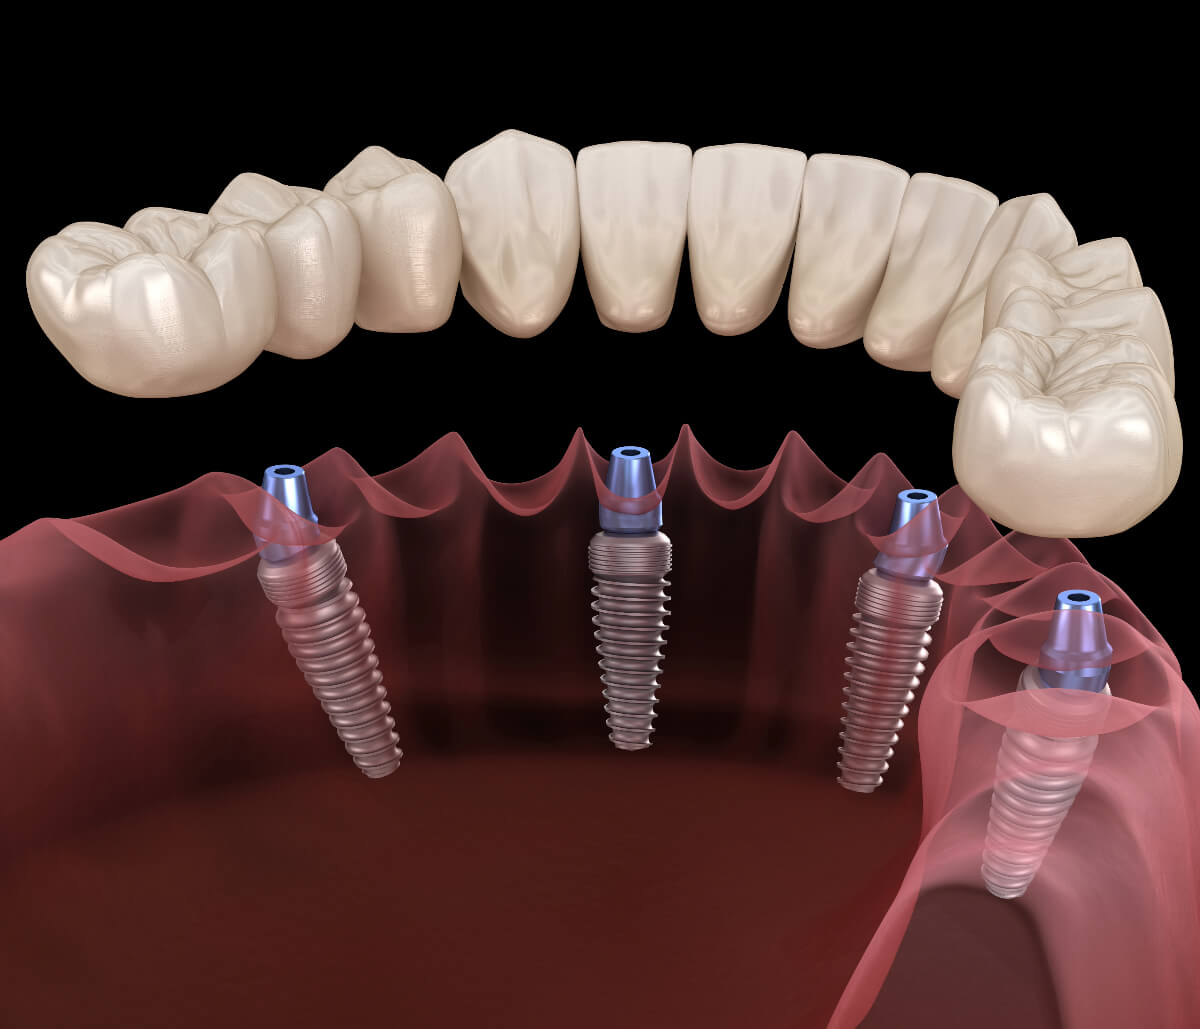 All-on-4 Dental Implants in San Mateo CA area